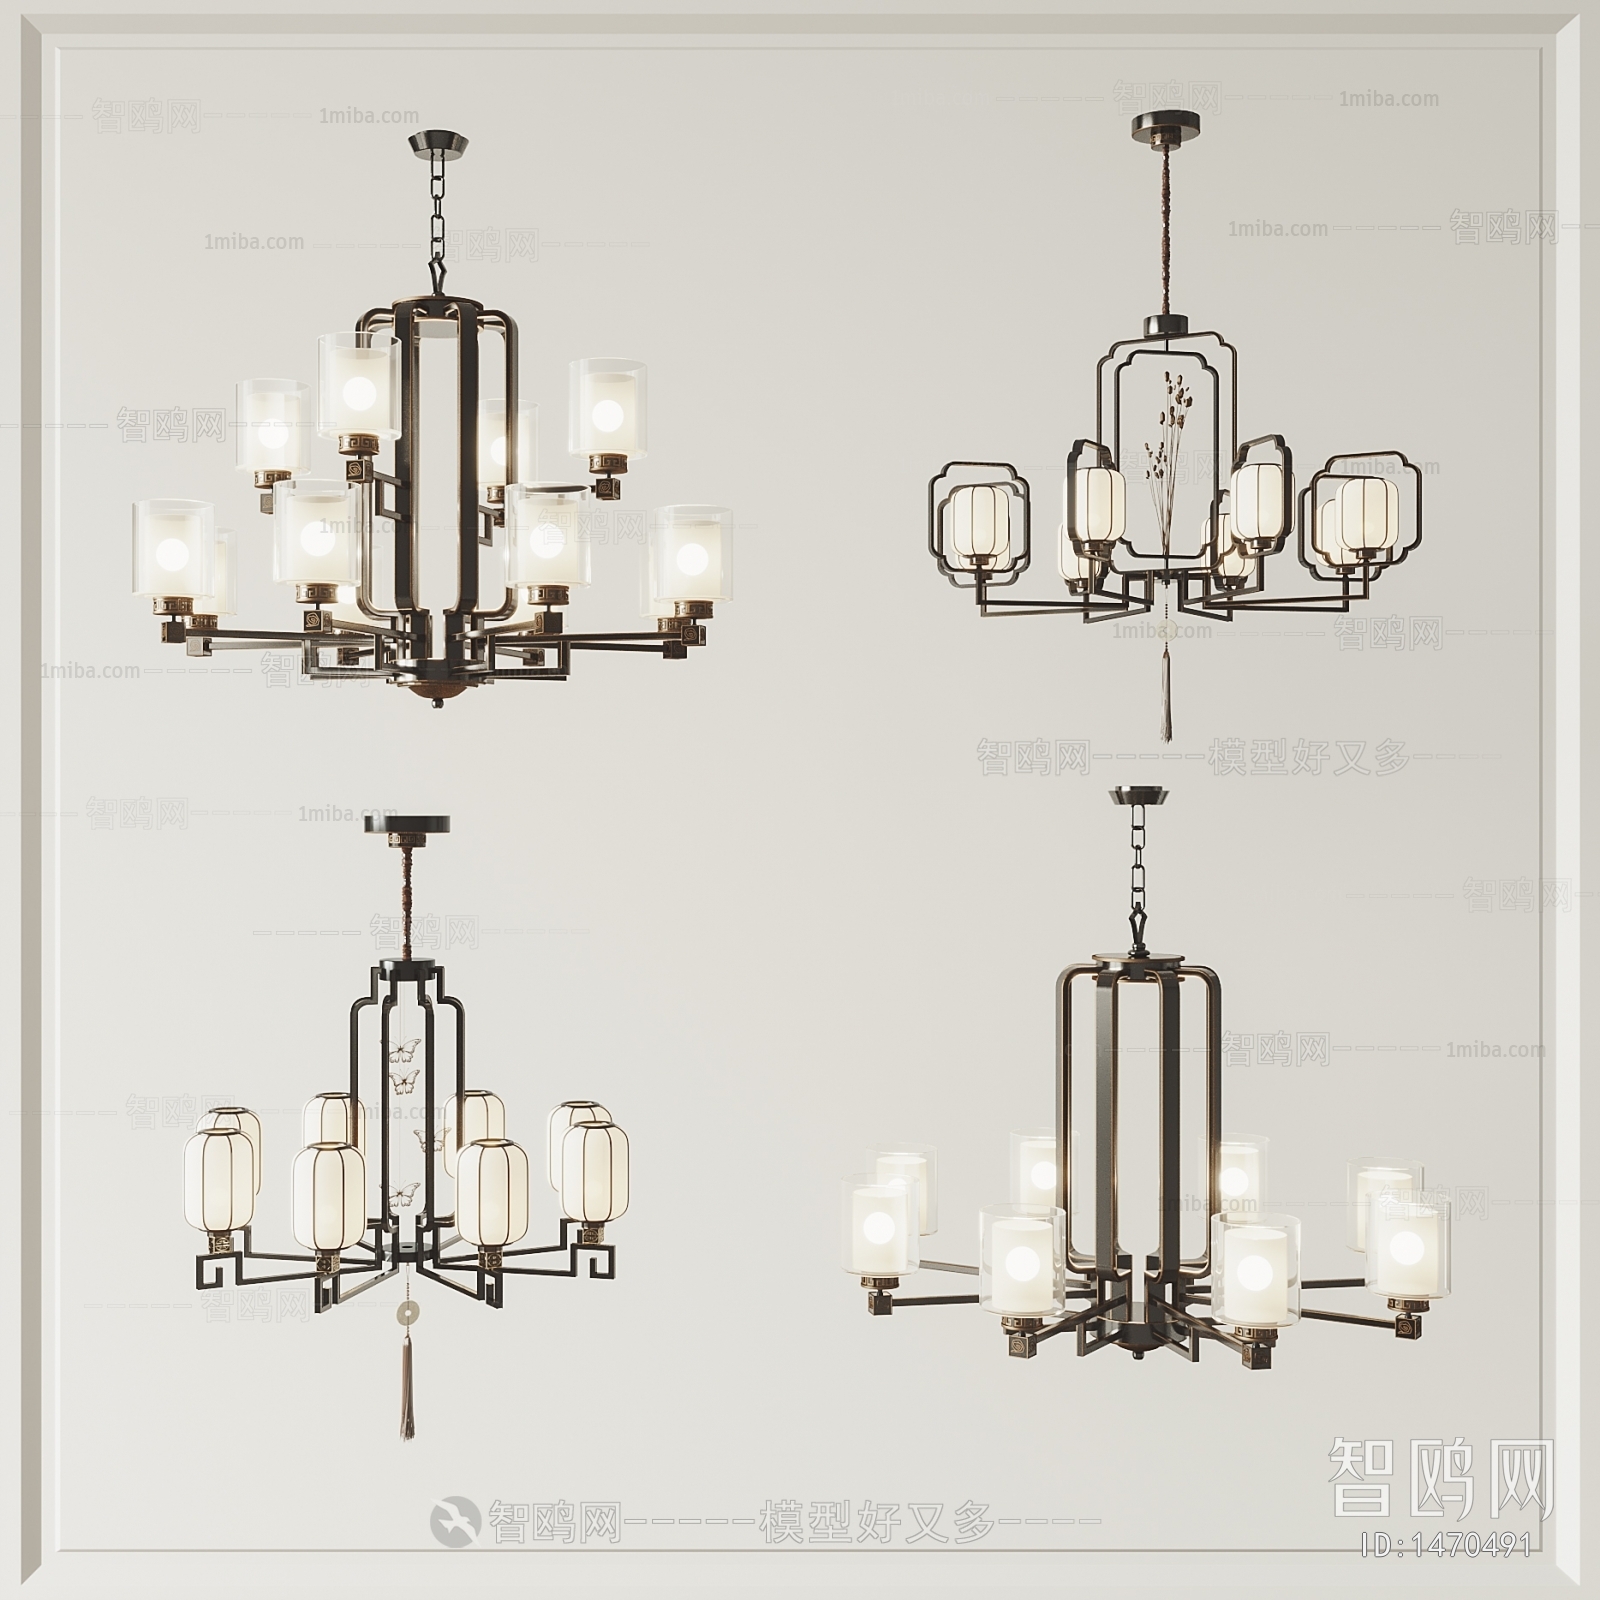 New Chinese Style Droplight